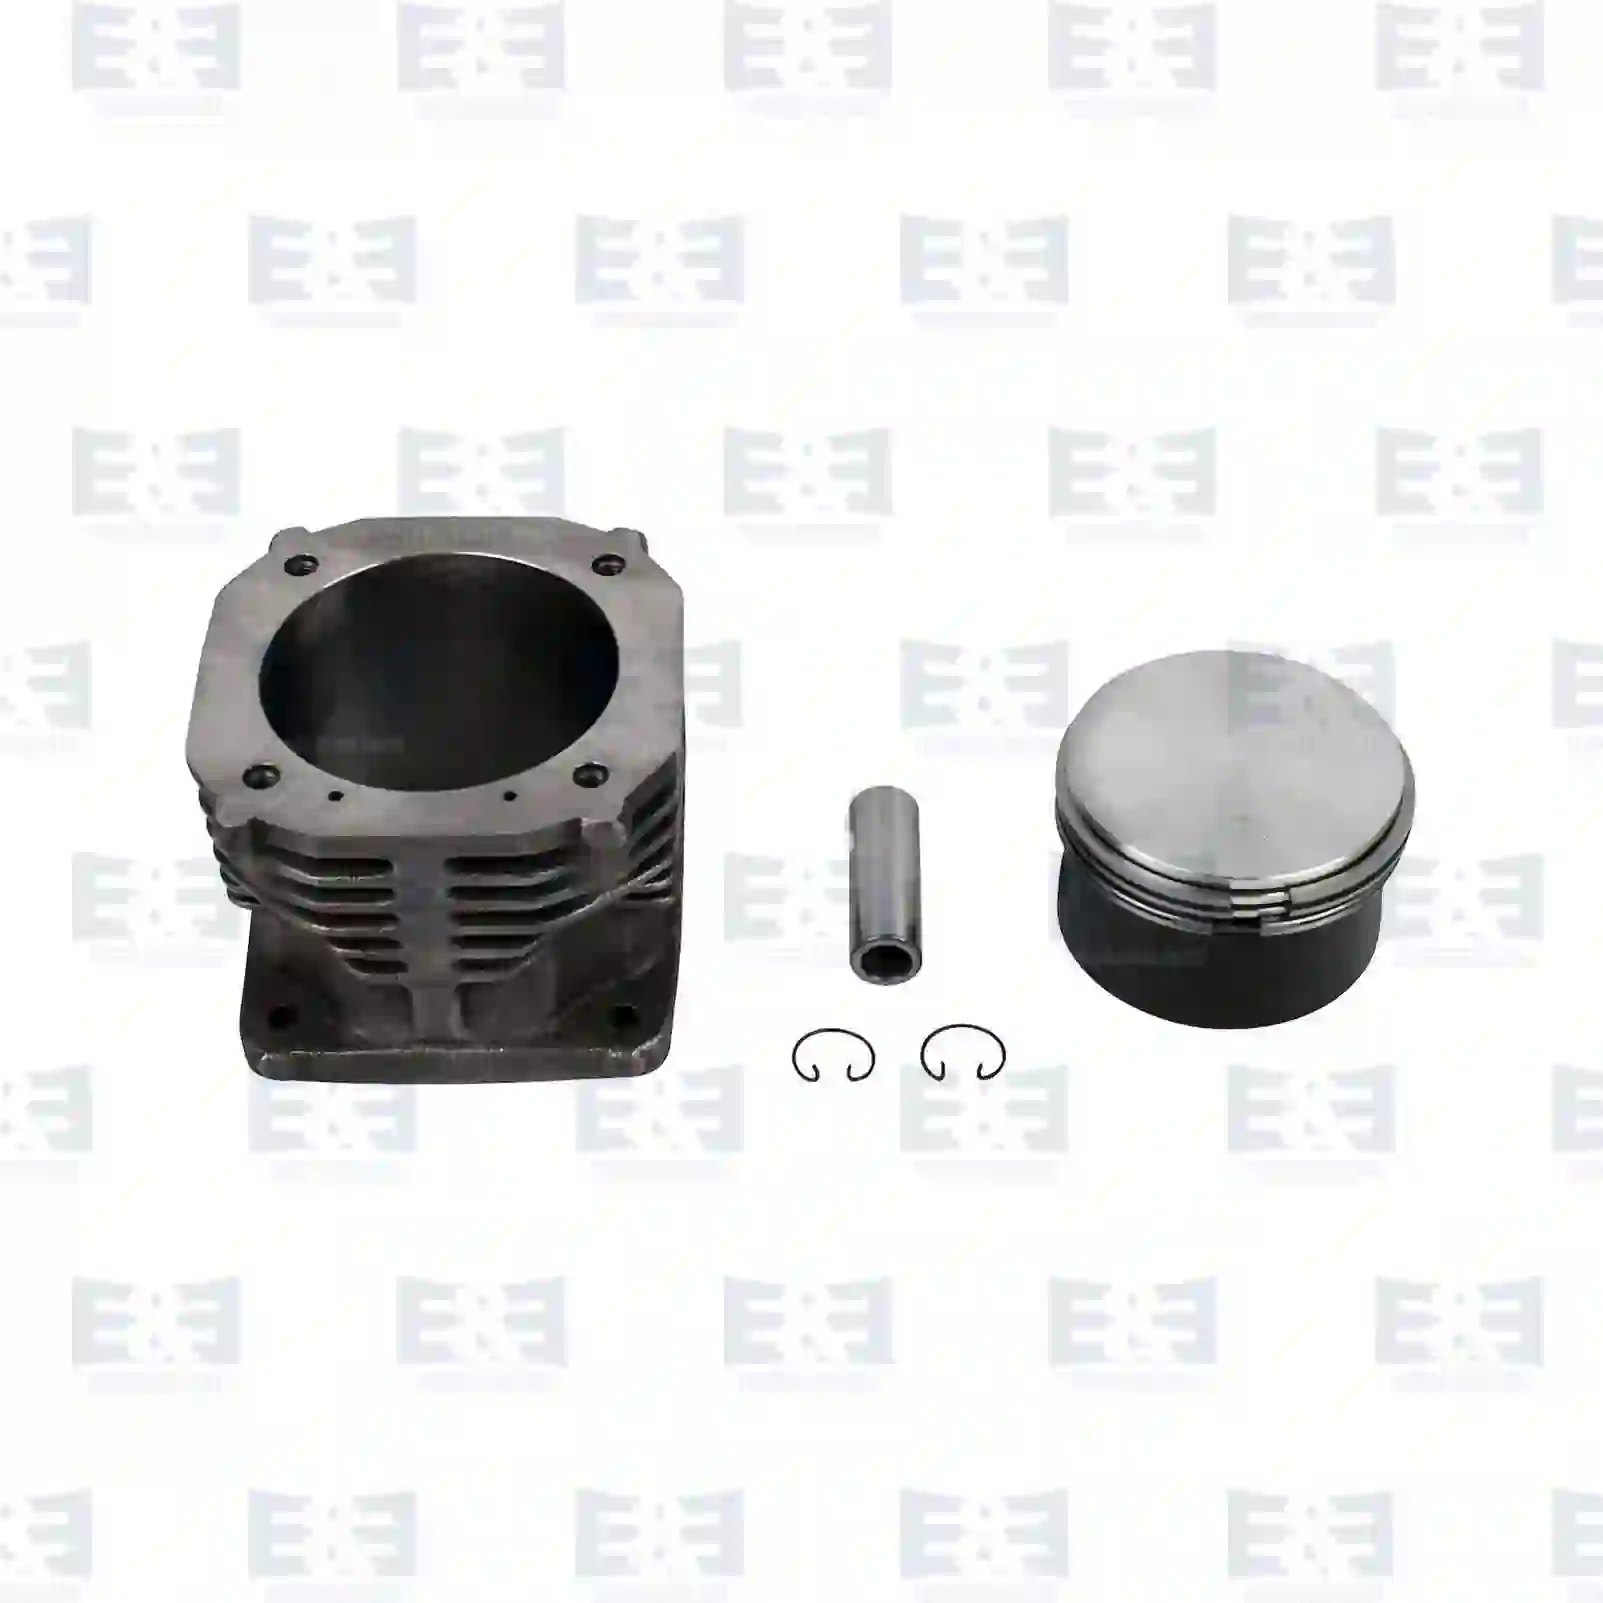 Piston and liner kit, air cooled, 2E2297232, 51541050003, 51541050007, 51541056003, 51541056006, 51541190001, 51541190003, 51541190005, 51541190006, 51541190014, 51541197001, 51541197003, 51541197004, 4031300008, 4031300117, 4031310002, 4031311002, 4031312002, 4421300002, 4421300008, 4421300608, ZG50559-0008 ||  2E2297232 E&E Truck Spare Parts | Truck Spare Parts, Auotomotive Spare Parts Piston and liner kit, air cooled, 2E2297232, 51541050003, 51541050007, 51541056003, 51541056006, 51541190001, 51541190003, 51541190005, 51541190006, 51541190014, 51541197001, 51541197003, 51541197004, 4031300008, 4031300117, 4031310002, 4031311002, 4031312002, 4421300002, 4421300008, 4421300608, ZG50559-0008 ||  2E2297232 E&E Truck Spare Parts | Truck Spare Parts, Auotomotive Spare Parts